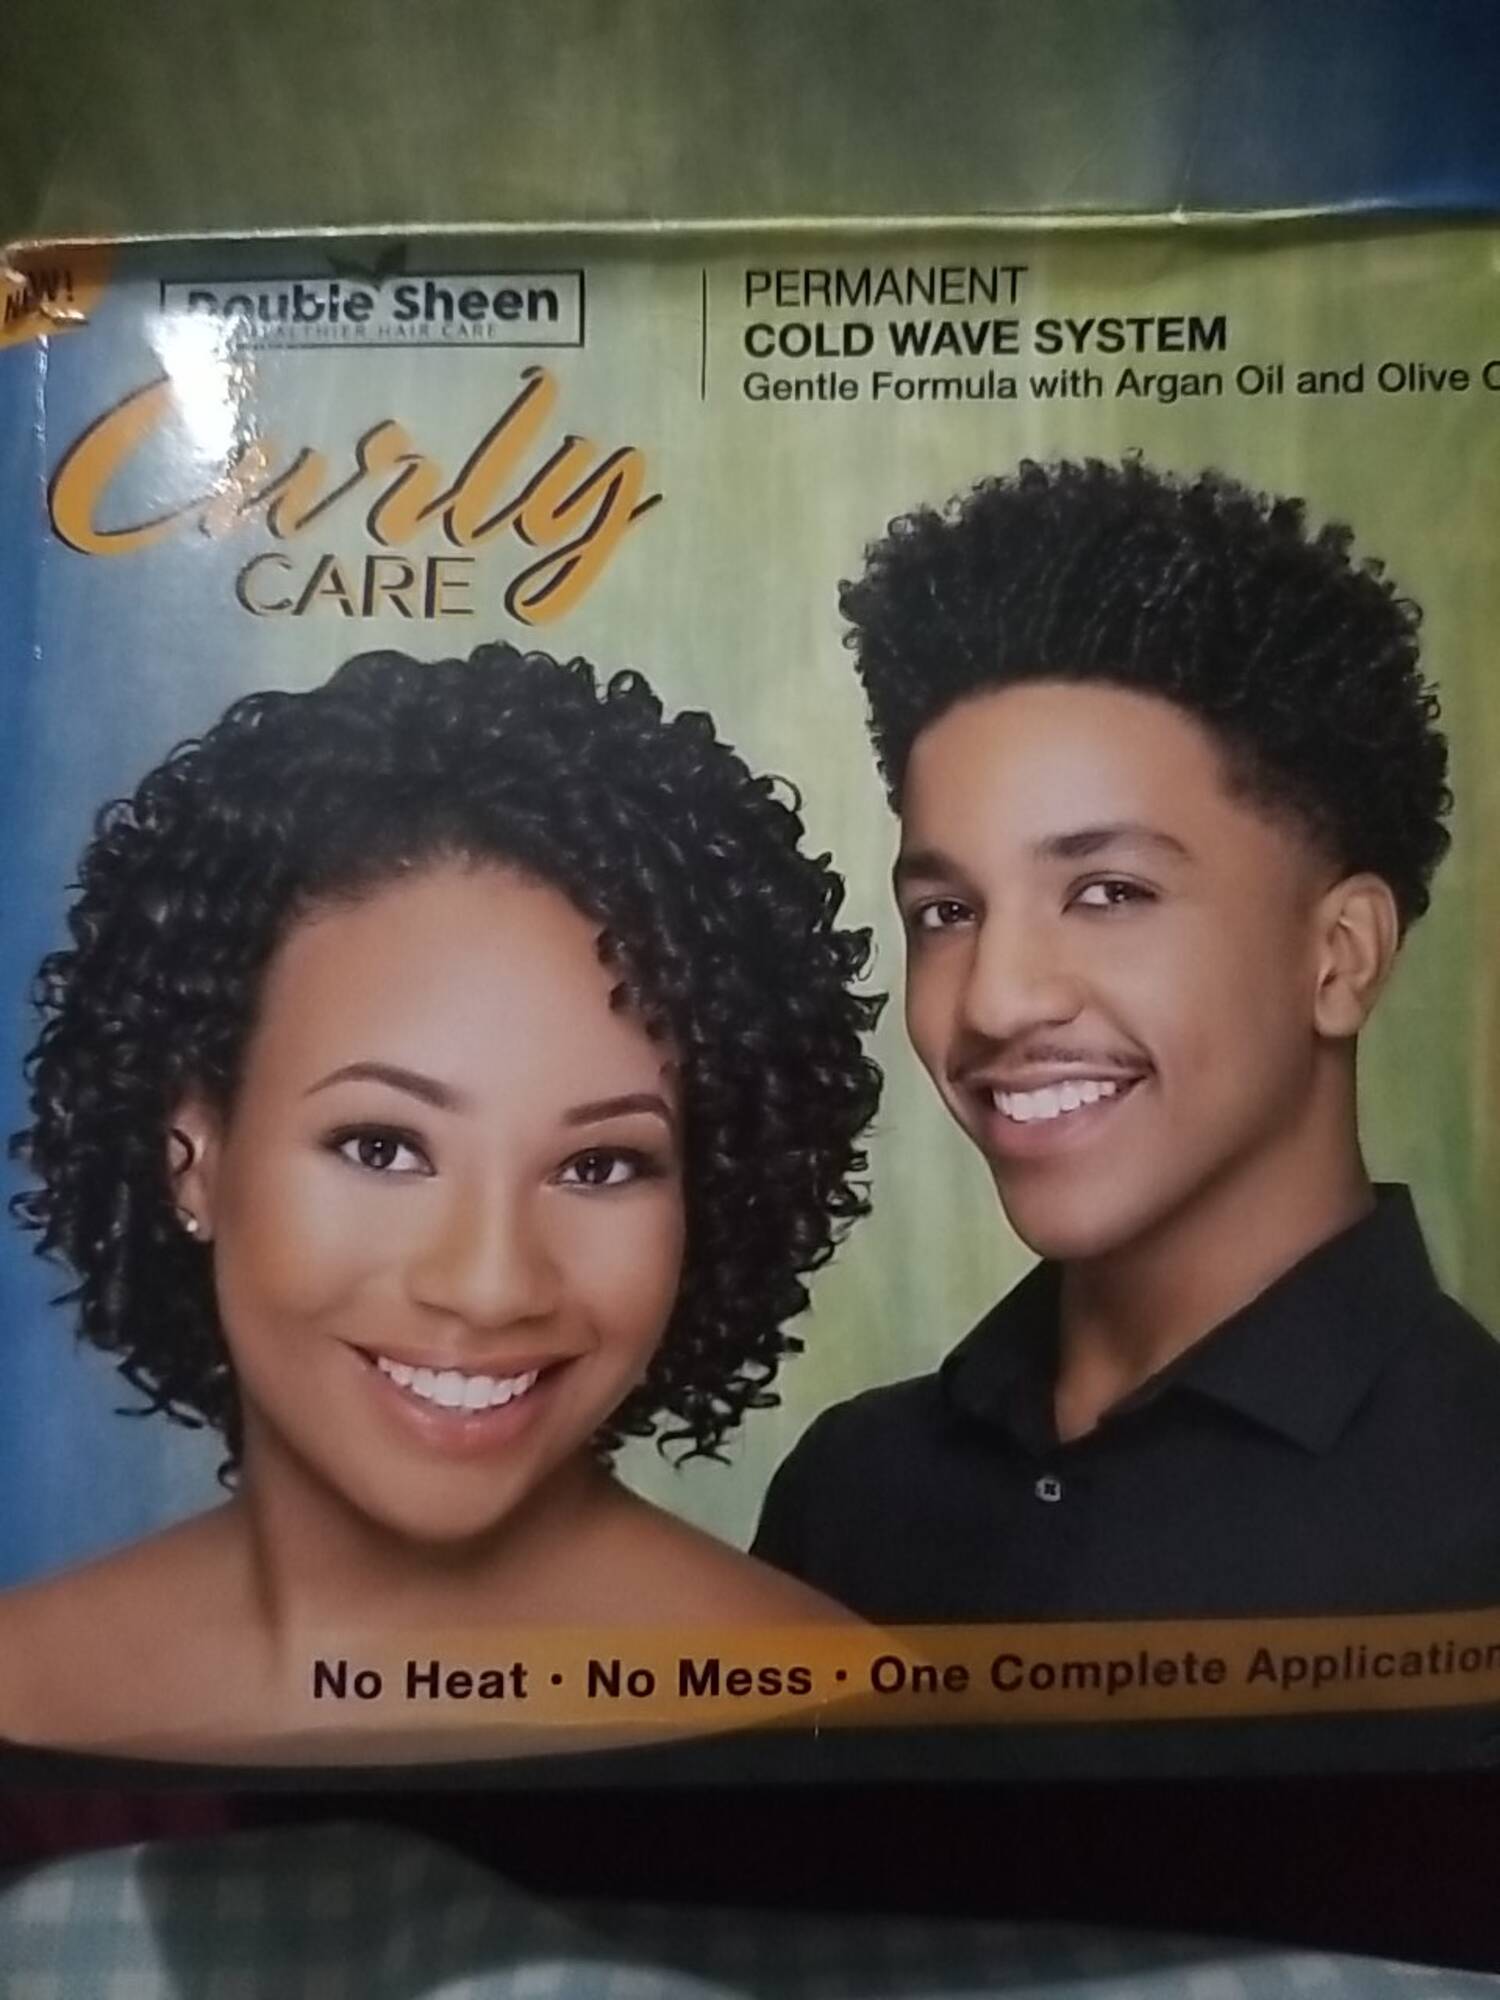 DOUBLE SHEEN - Curly care - Permanent cold wave system